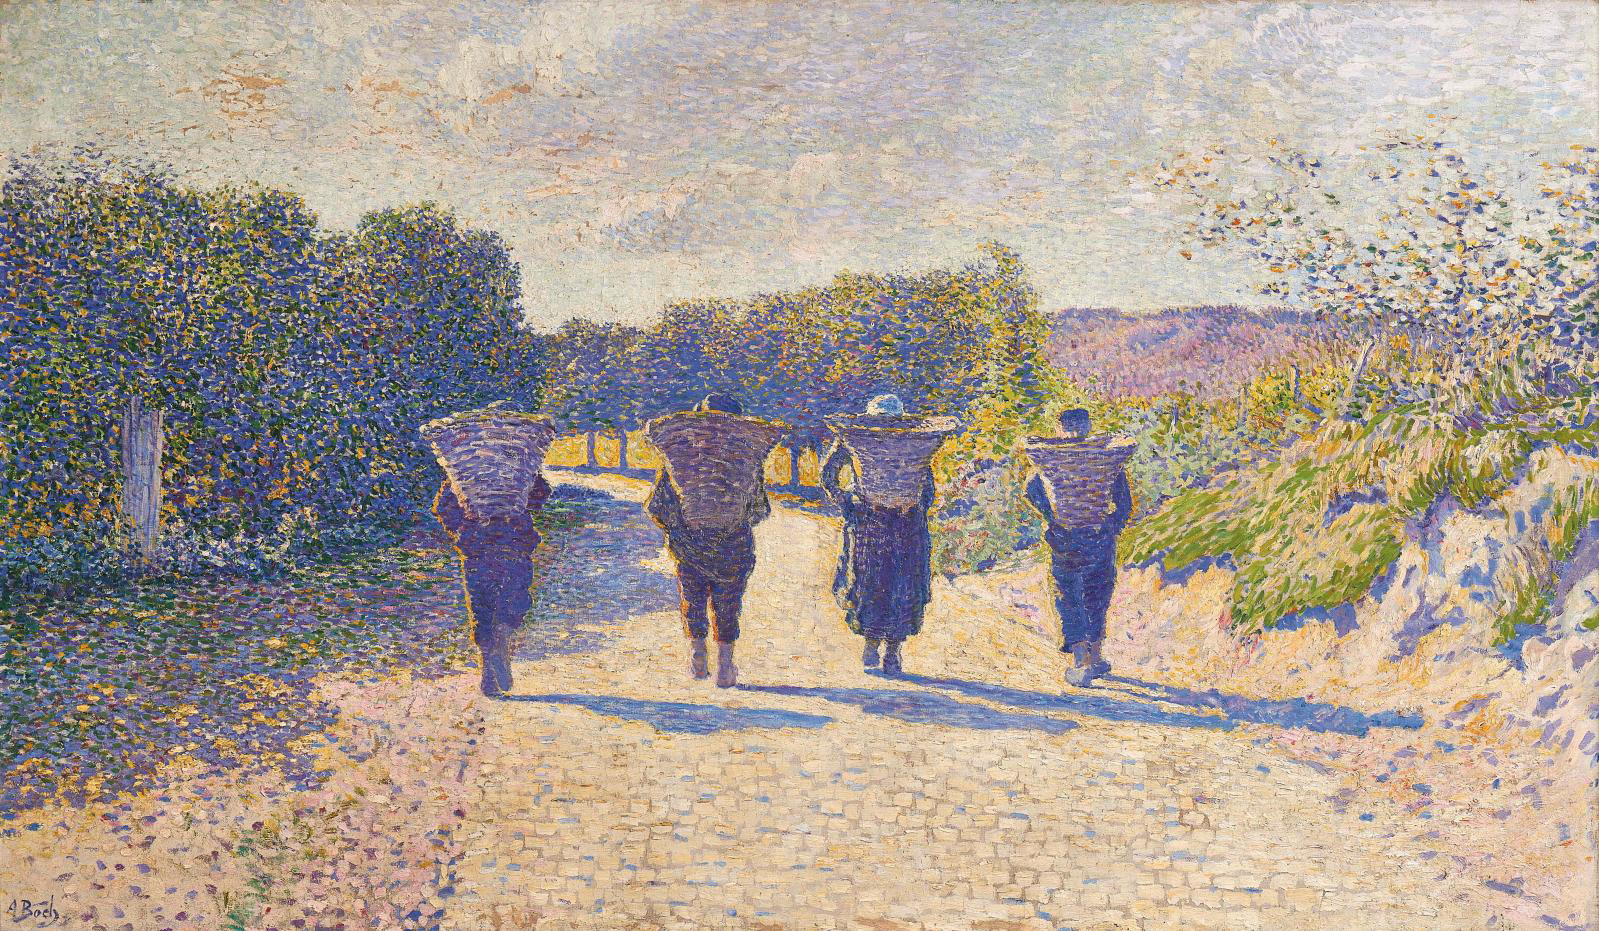 Anna Boch, an Impressionist in Pont-Aven